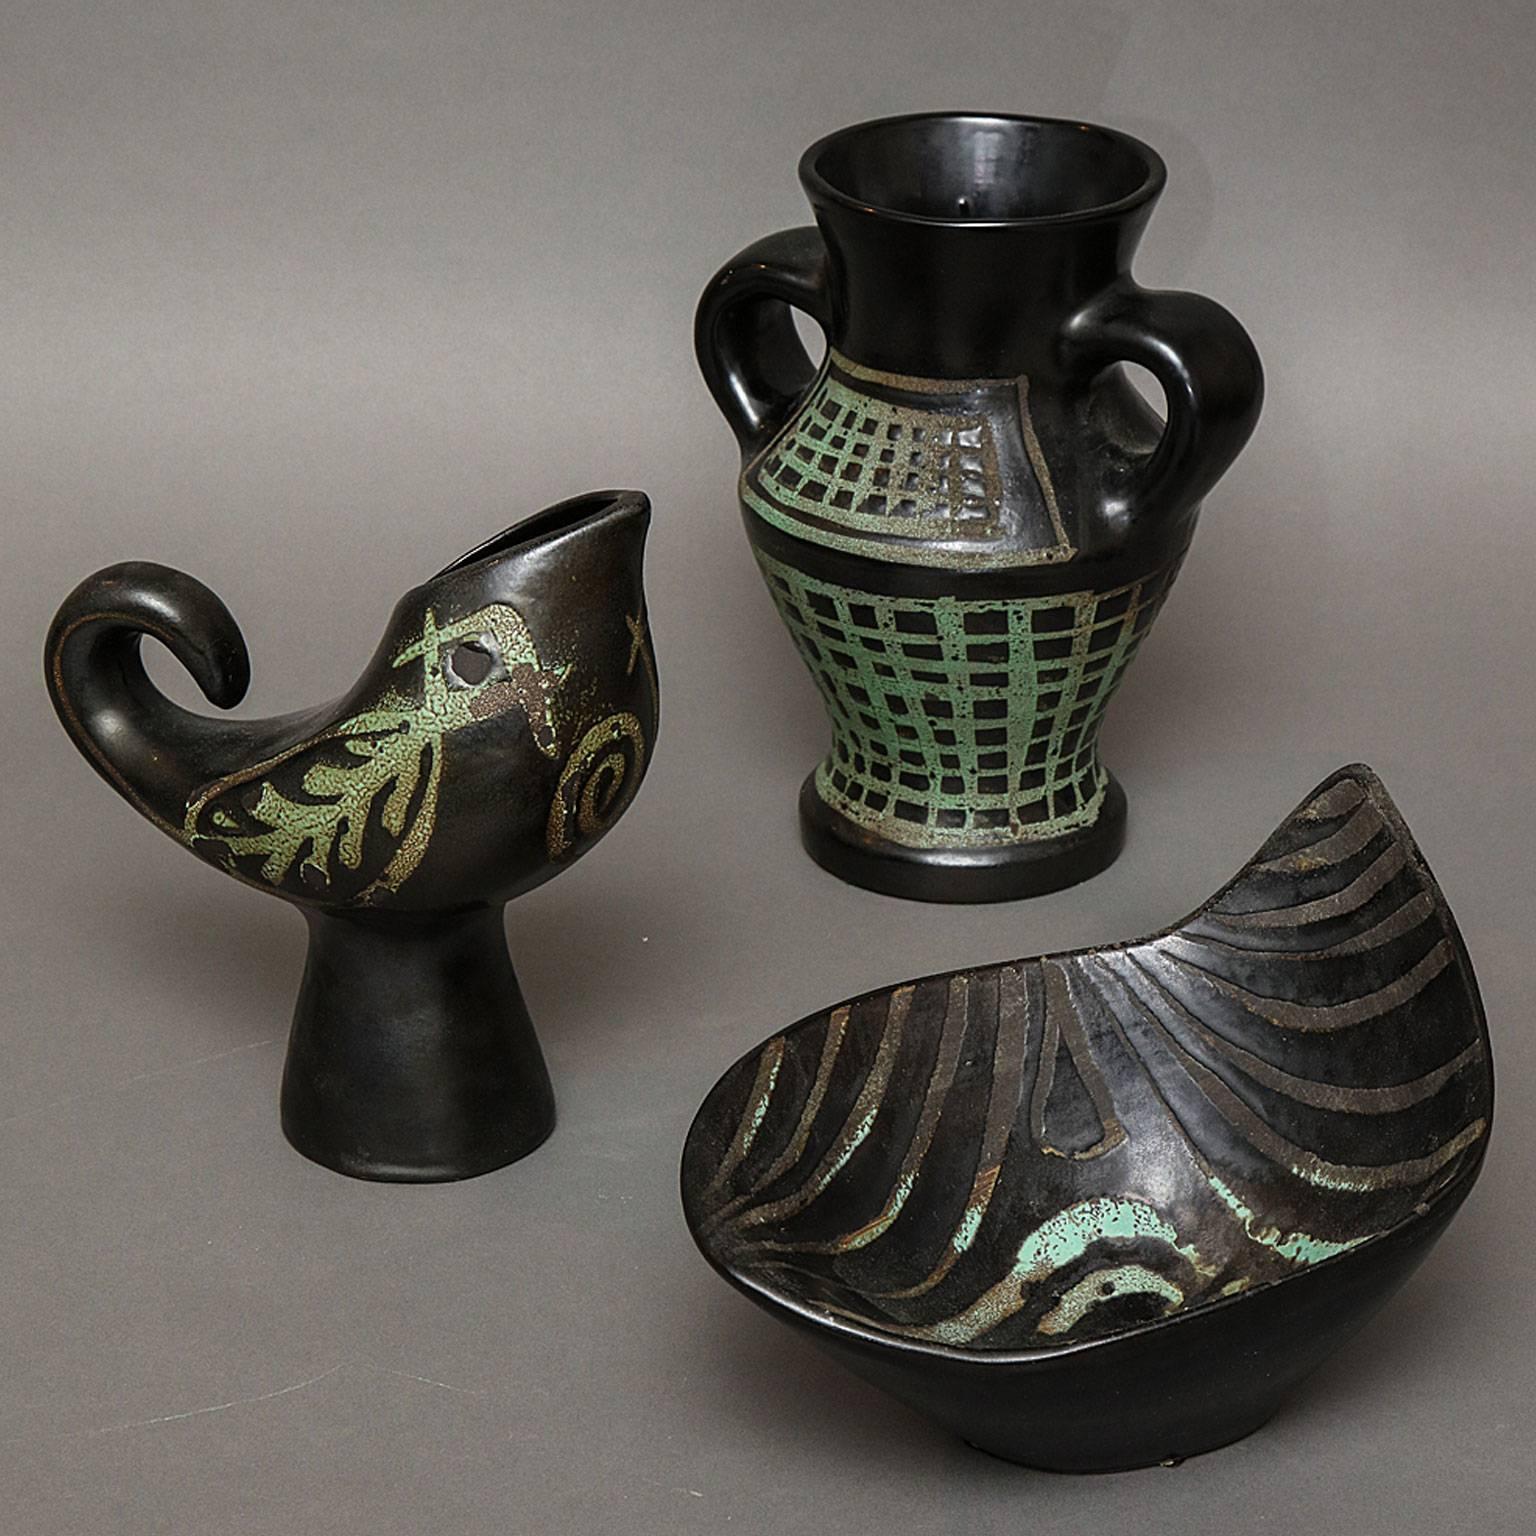 Roger Capron (1922-2006)
A trio of ceramic vessels with matte glazes on black faience.
Included are the coupe, the zoomorphic Vase Coq, and the Classical Vase à Anses. 
Jug Signed: CAPRON, coupe and bird signed: Capron Vallauris France
French,